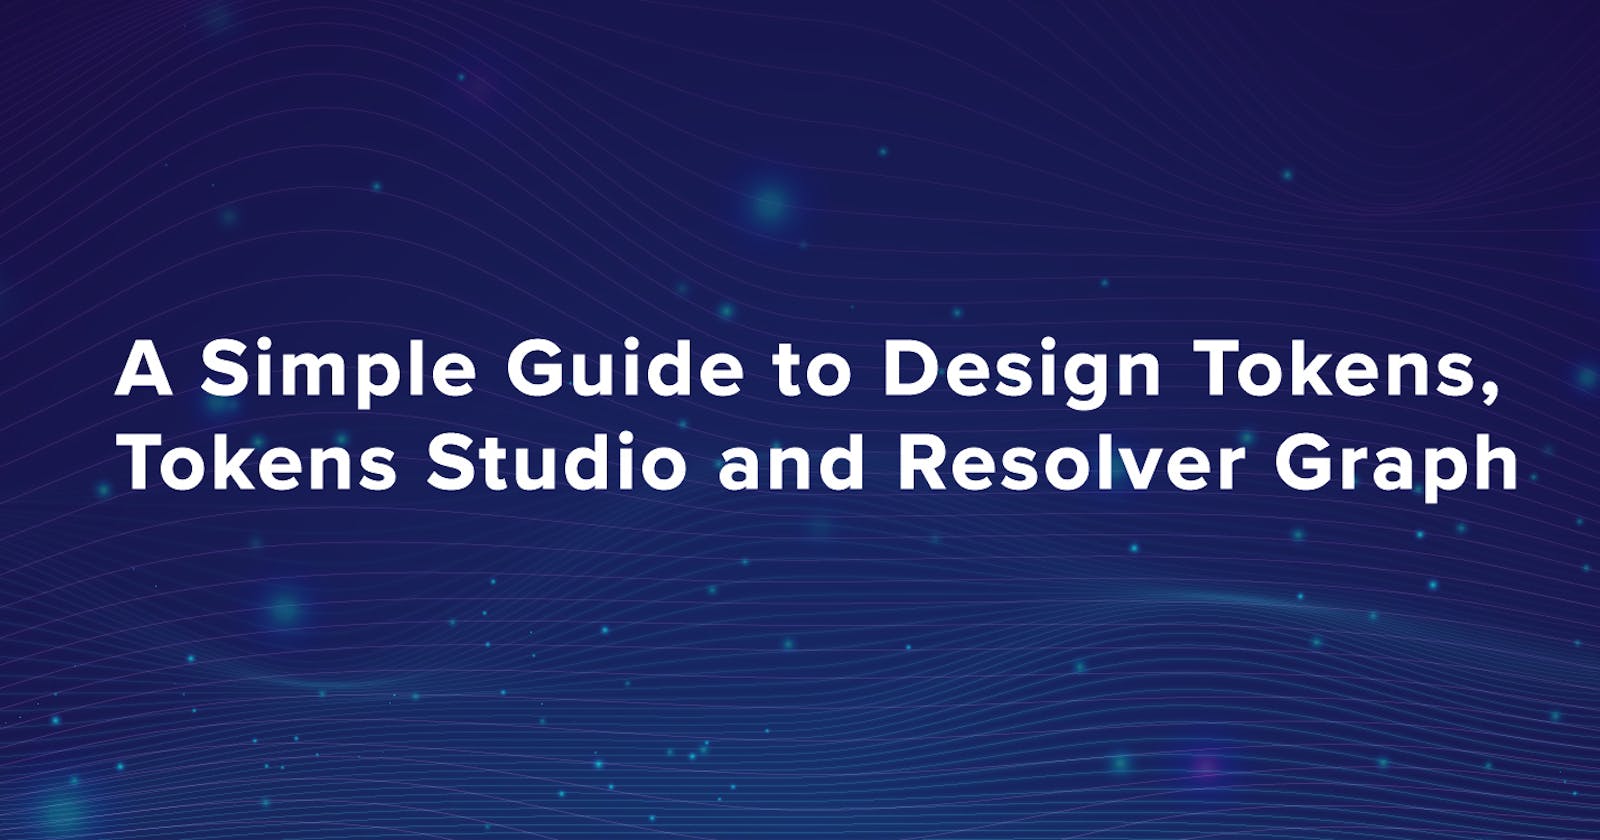 A Simple Guide to Design Tokens, Tokens Studio, and Resolver Graph